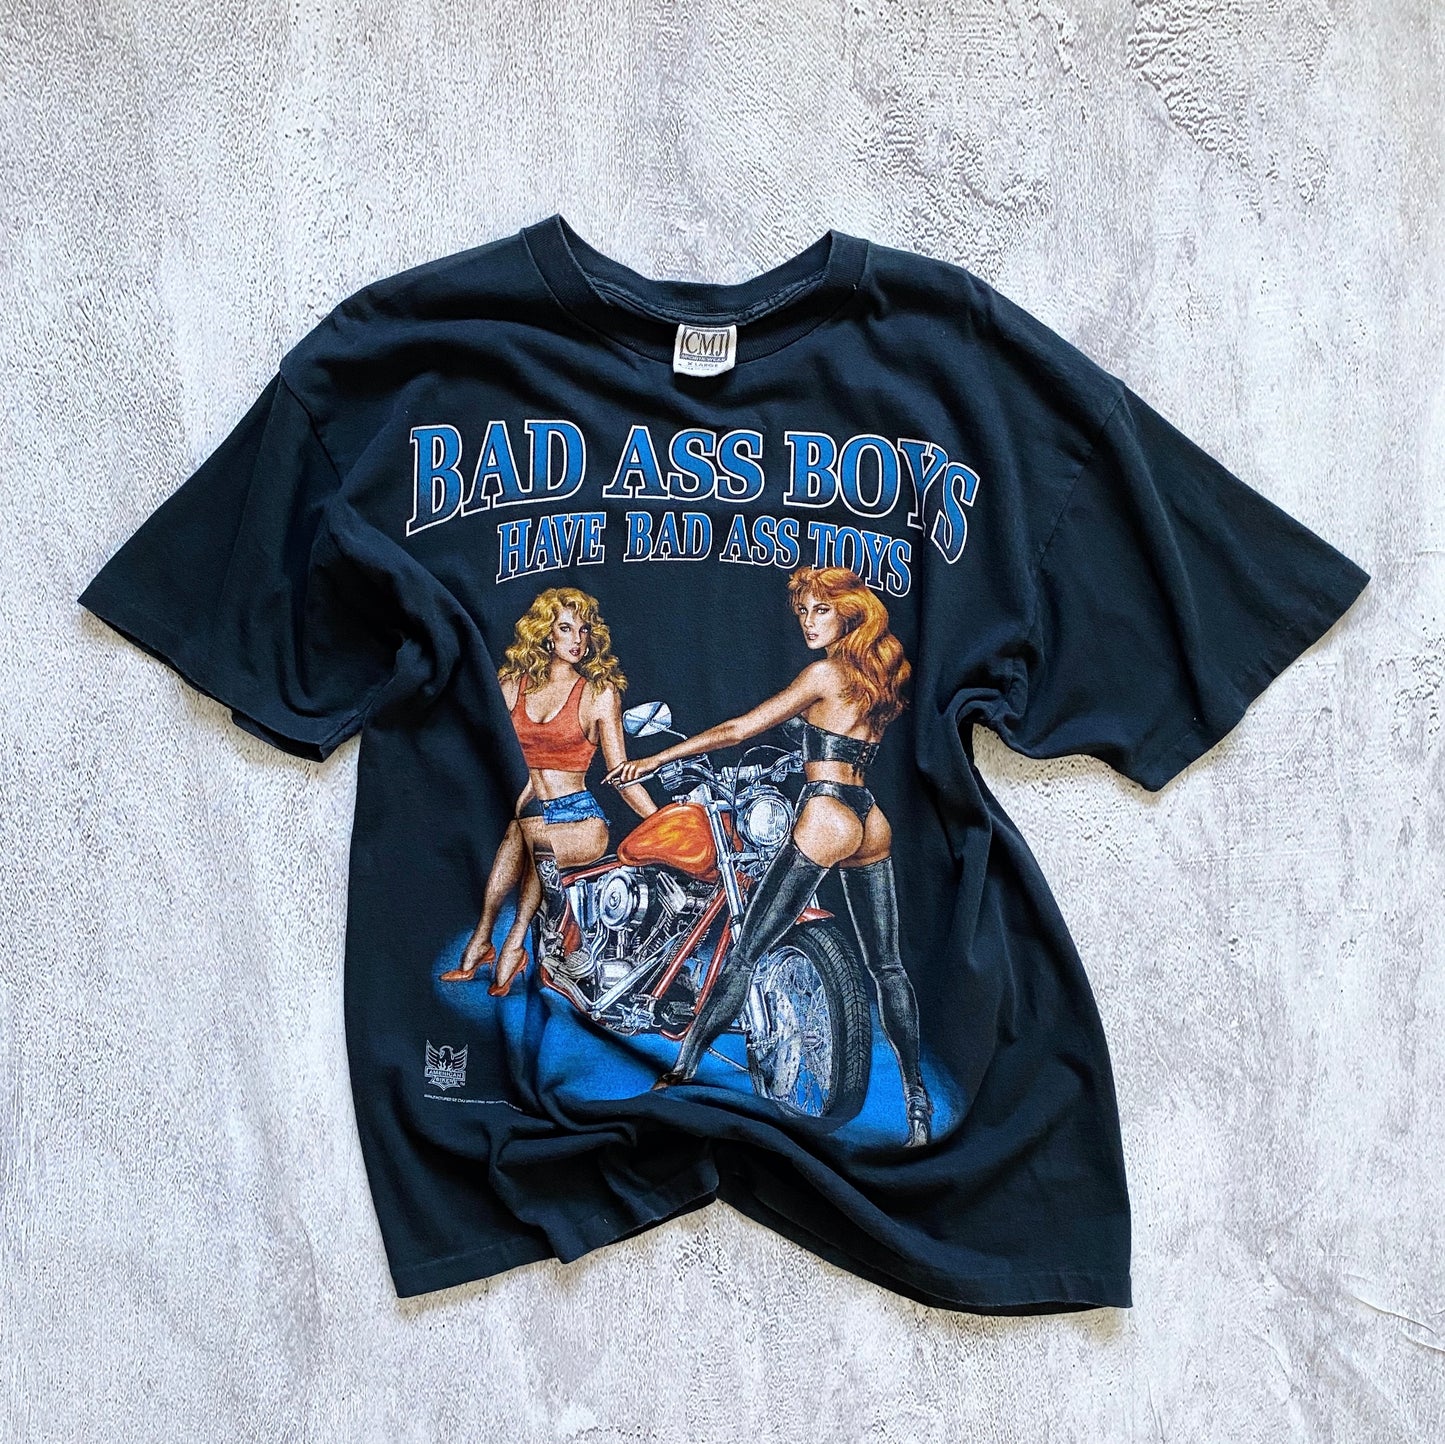 VINTAGE SINGLE STITCH "BAD ASS BOYS HAVE BAD ASS TOYS" TEE-1990'S SIZE XL